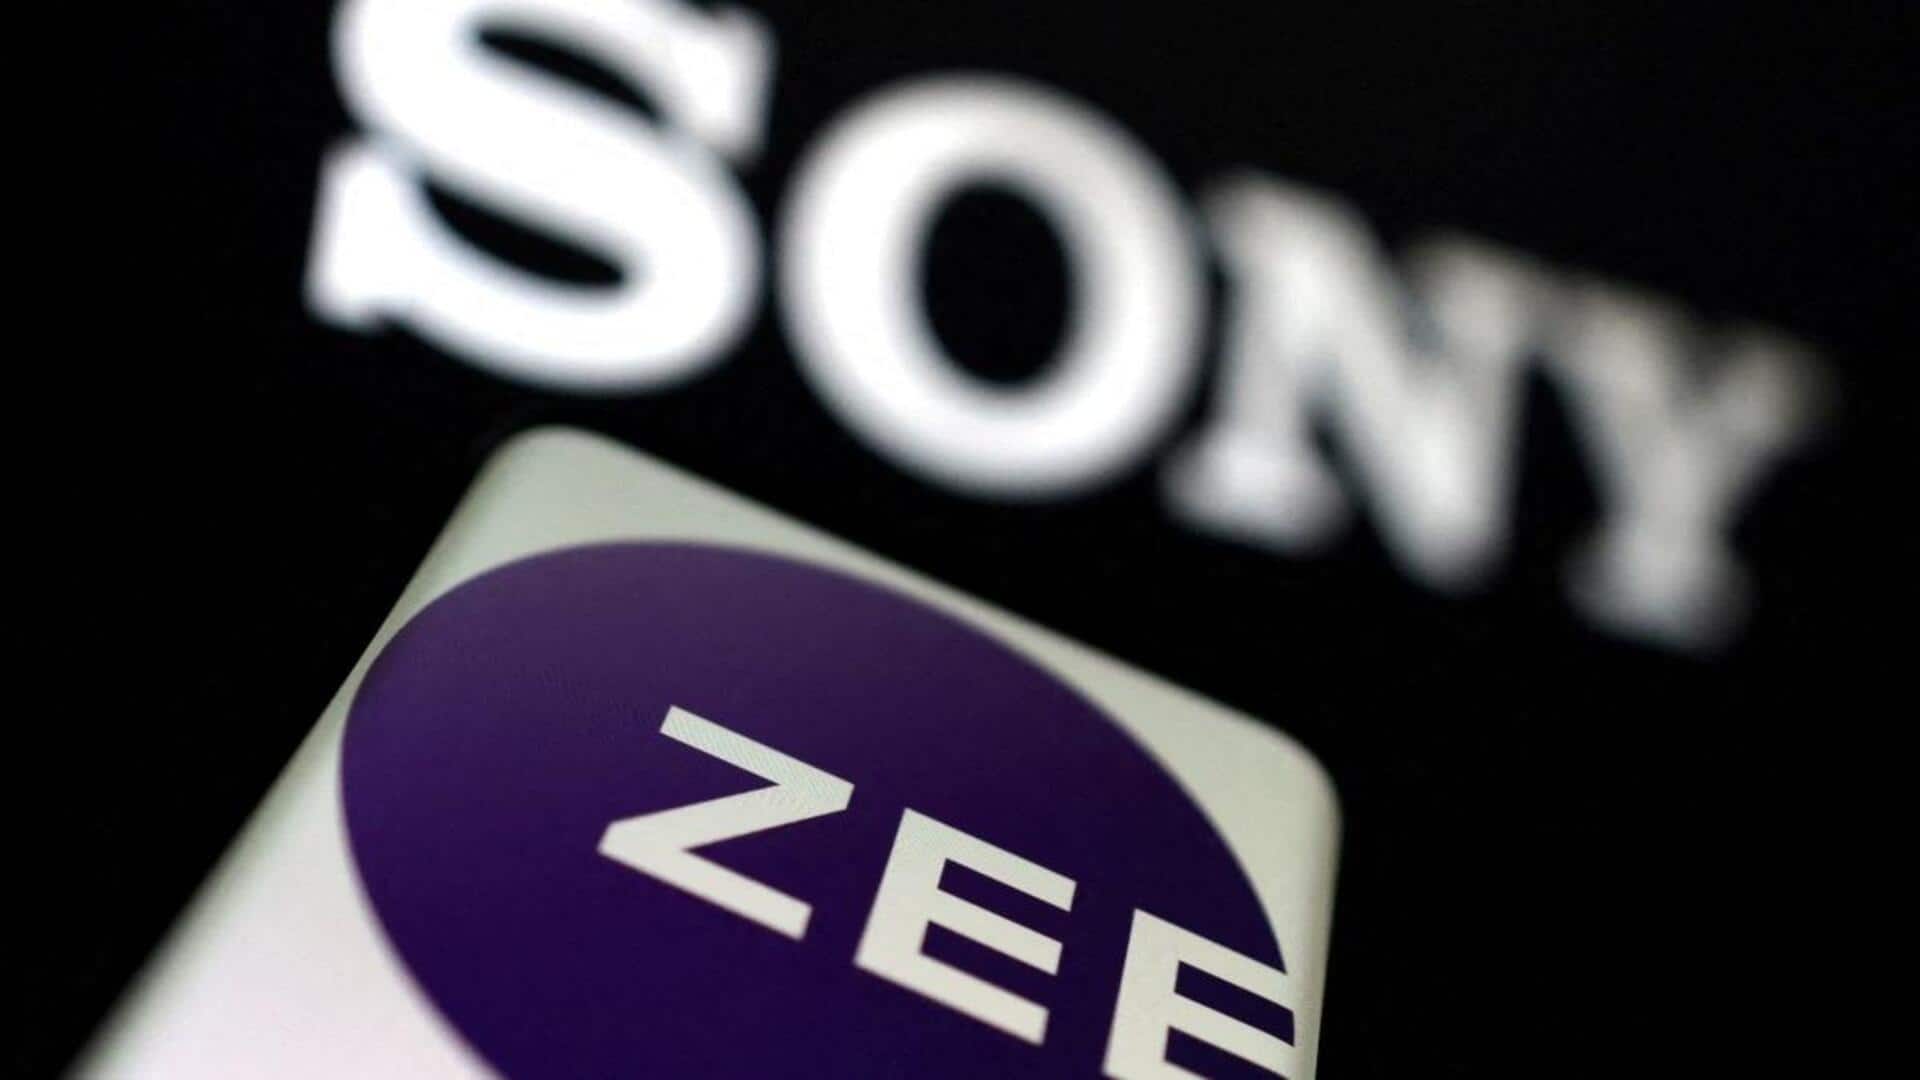 Zee hits lower circuit, plunges 30%: Here's why